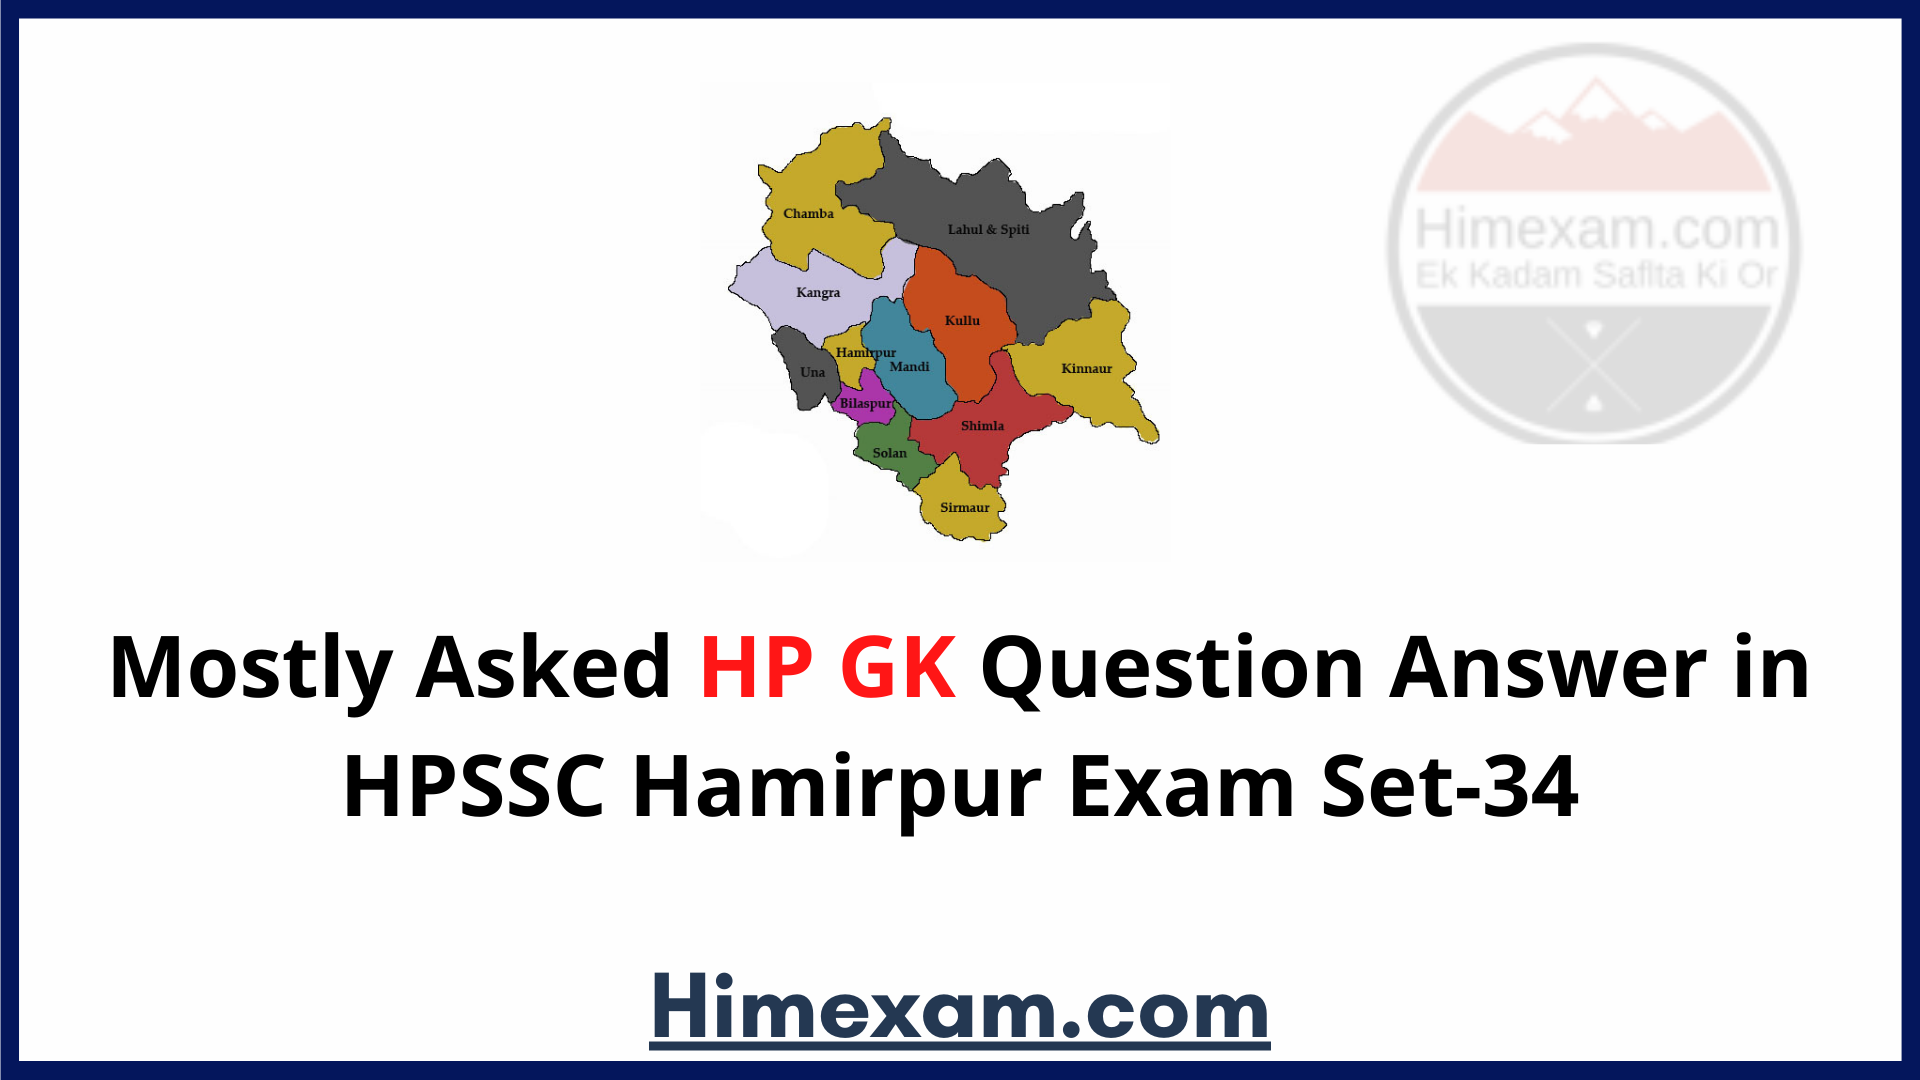 Mostly Asked HP GK Question Answer in HPSSC Hamirpur Exam Set-34